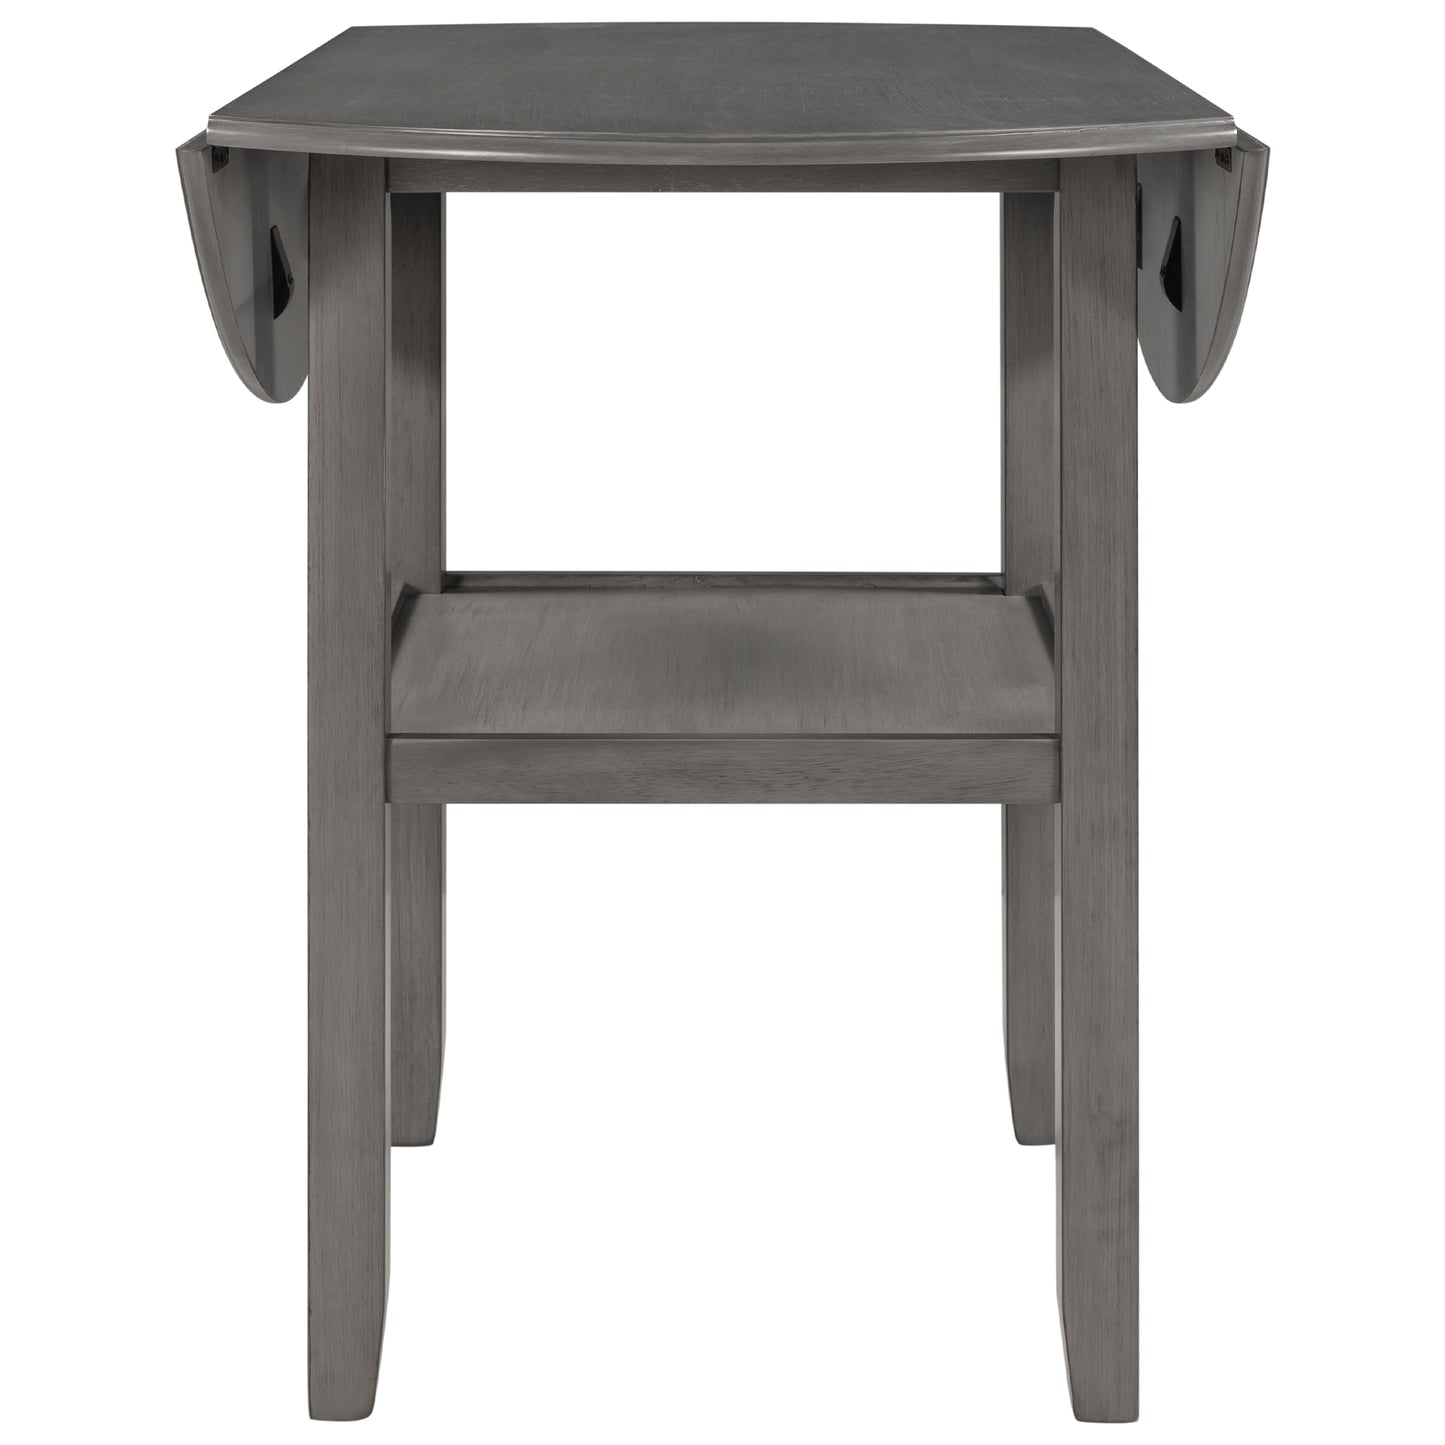 TOPMAX Farmhouse Round Counter Height Kitchen Dining Table with Drop Leaf  and One Shelf for Small Places, Gray